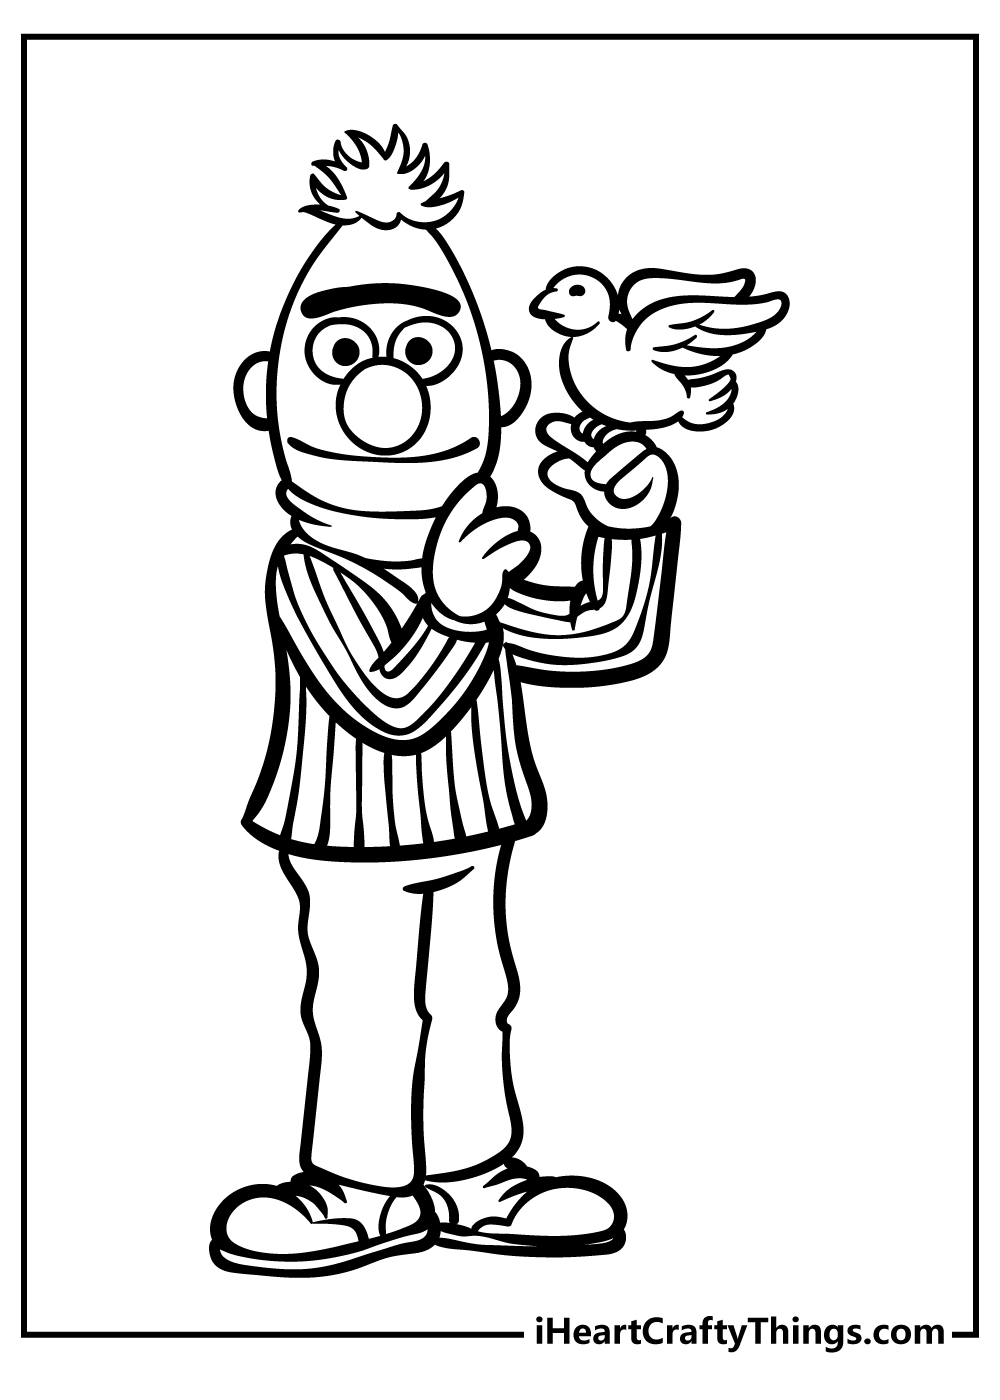 Sesame Street Coloring Pages for adults free printable